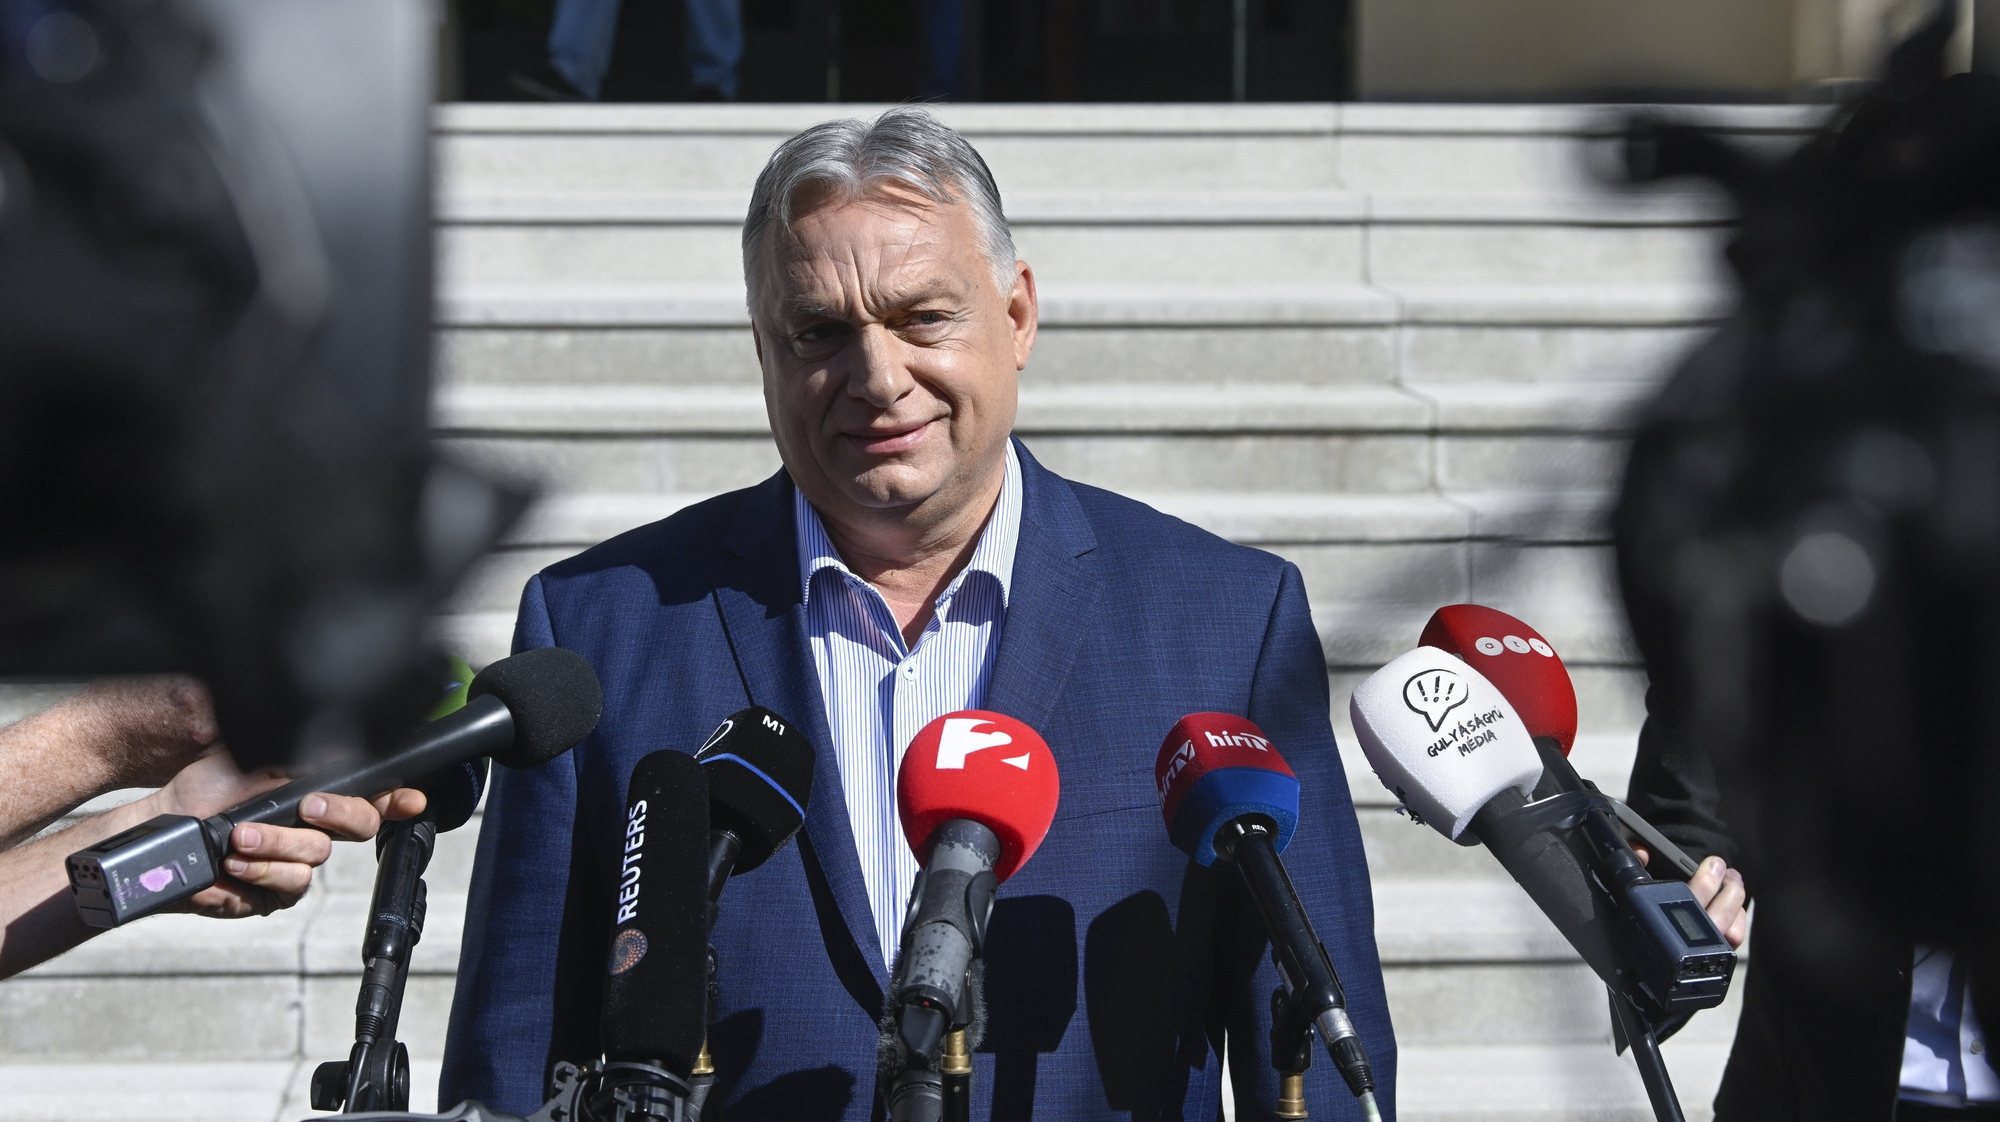 epa11398961 Hungarian Prime Minister Viktor Orban, leader of the ruling Fidesz party, speaks to the media after casting his vote at a polling station during the European Parliament and the local elections in Budapest, Hungary, 09 June 2024. The European Parliament elections take place across EU member states from 06 to 09 June 2024.  EPA/Szilard Koszticsak HUNGARY OUT